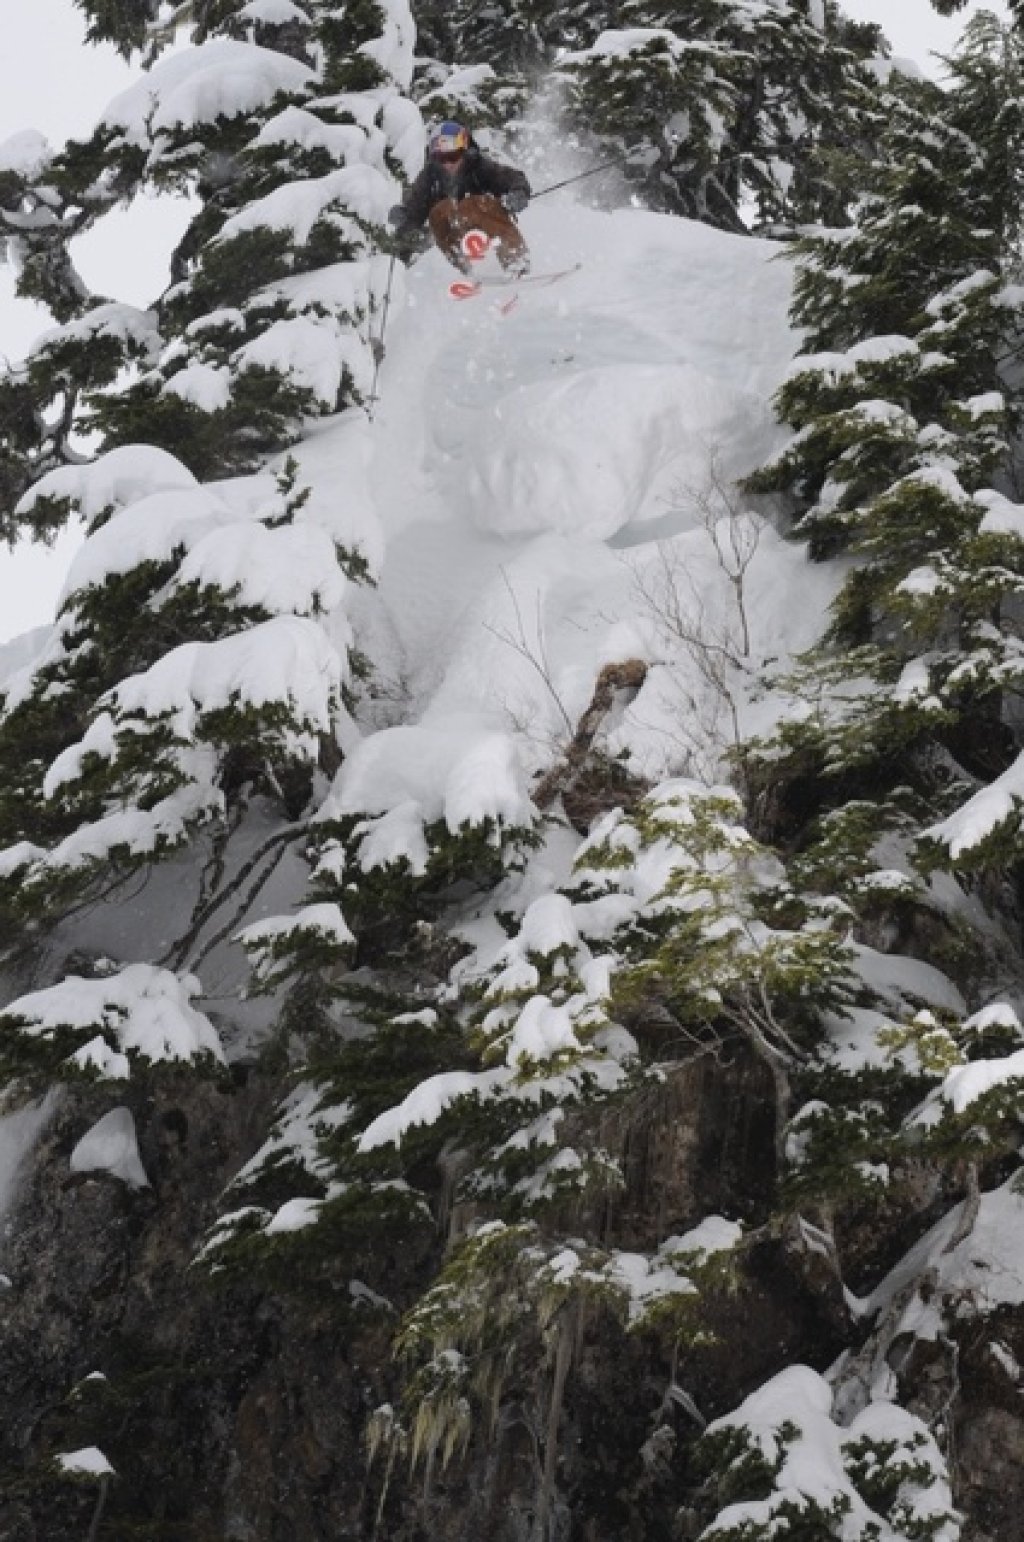 Shane McConkey doing one of his favorite things.